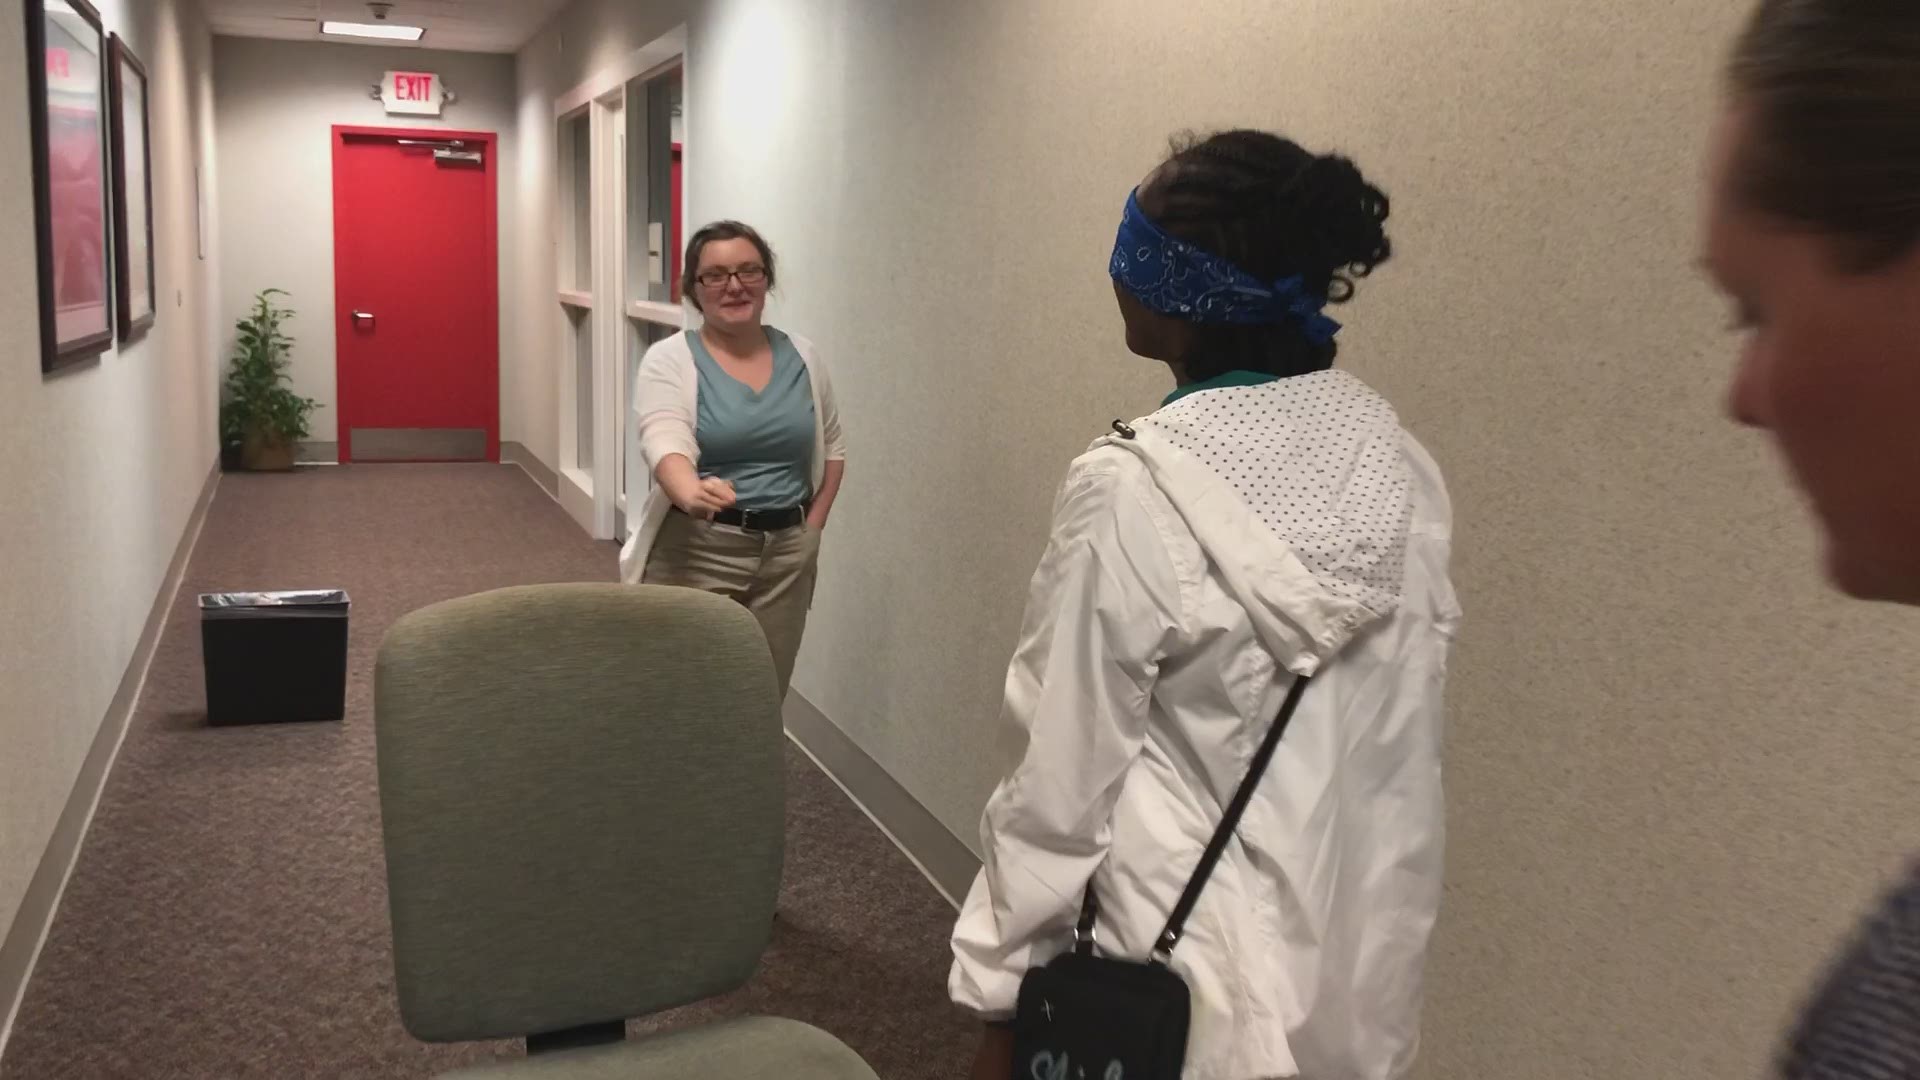 Amber helps her classmate navigate a hallway blindfolded as a part of a communications exercise at Project SEARCH